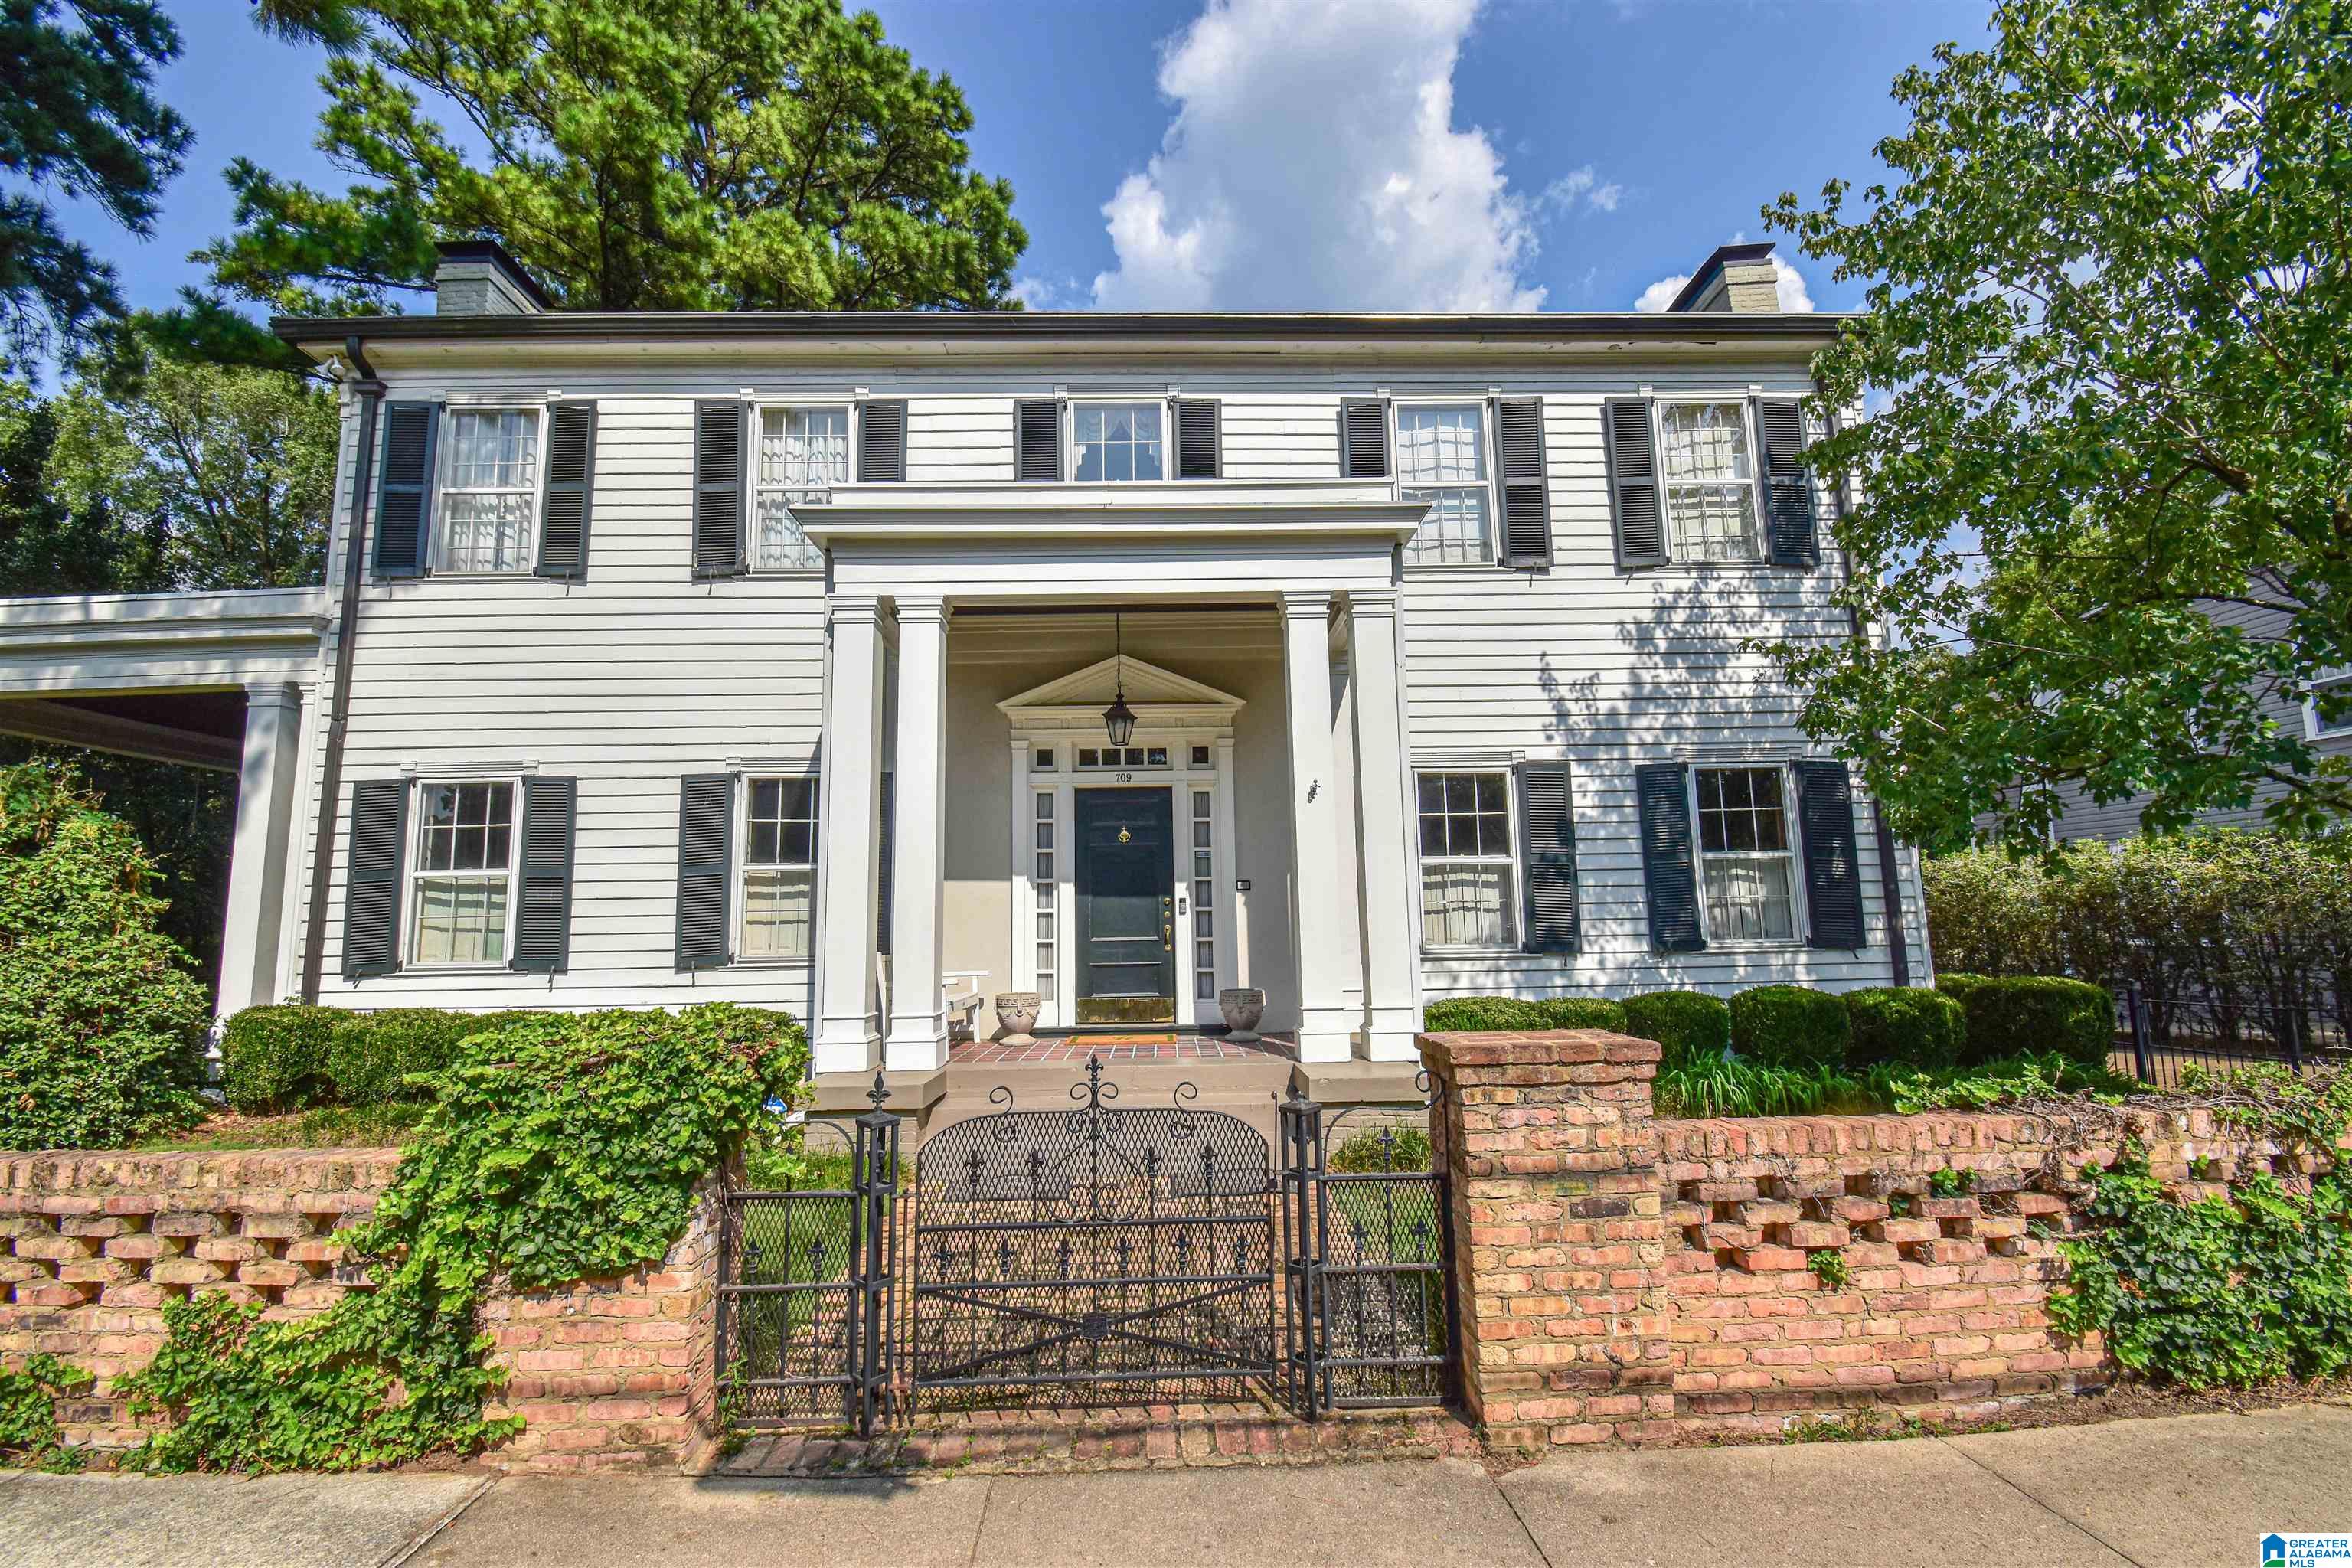 Built in 1842, this meticulously preserved home with more than 5,000 sf is one of a kind. Recently renovated kitchen, 9 fireplaces, heart pine flooring throughout, 10+ ft ceilings, built-in storage, 5 spacious bedrooms with a primary suite on the main level, a sitting room with heart pine from the Talladega National Forest.....these are just a few features that make this property spectacular. Located on a half acre corner lot in the original Historic District, this home is less than a mile walk to Bryant Denny Stadium and 2 blocks from University Blvd. Entertaining is a breeze with multiple exterior porches and a massive screened porch. Many improvements have been made while maintaining the character and integrity of this beautiful historic home.